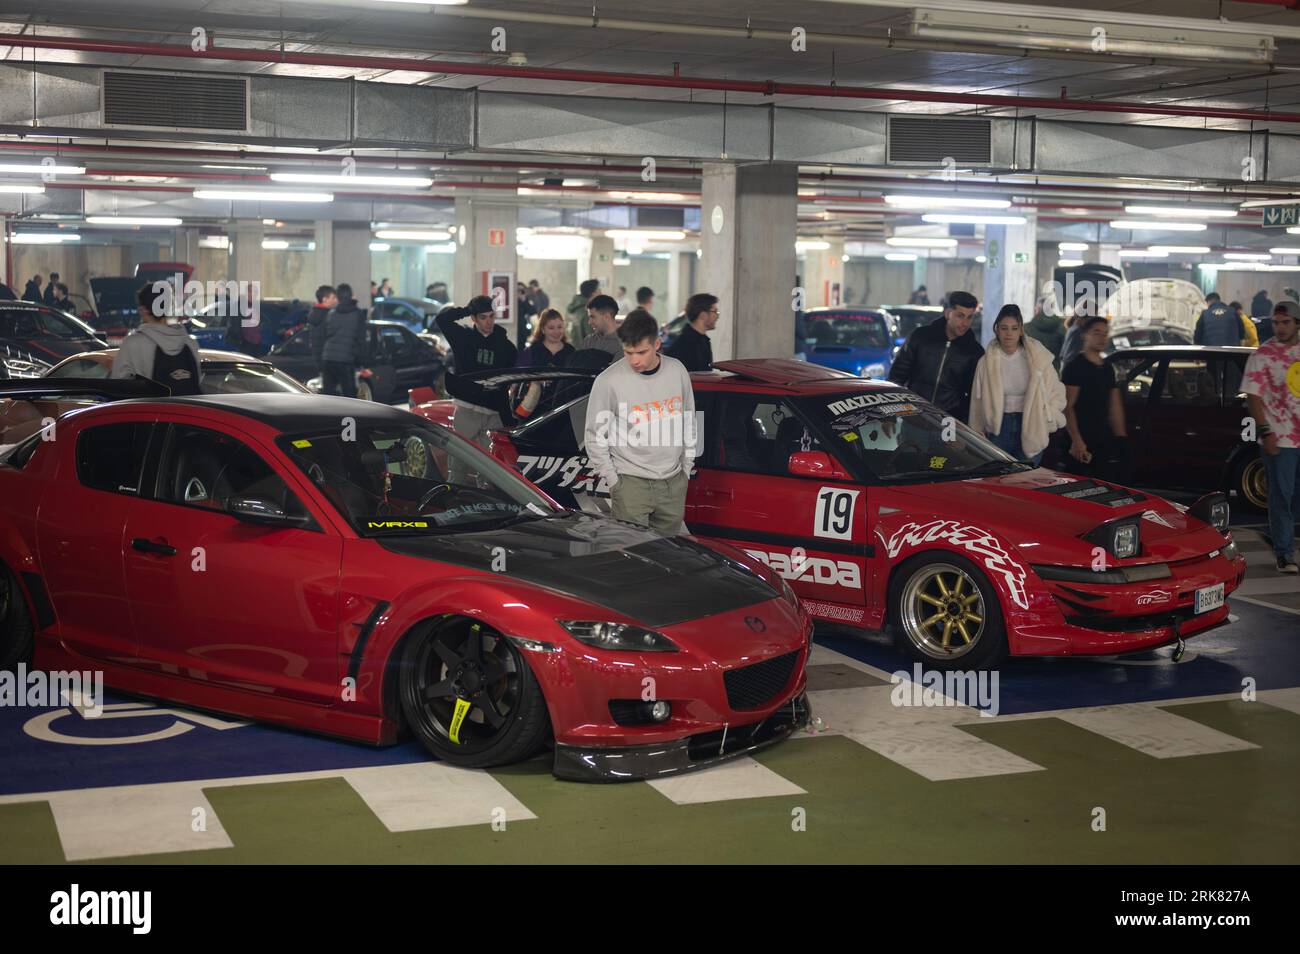 Red Mazda RX8 and Mazada 323f modified for street racing Stock Photo